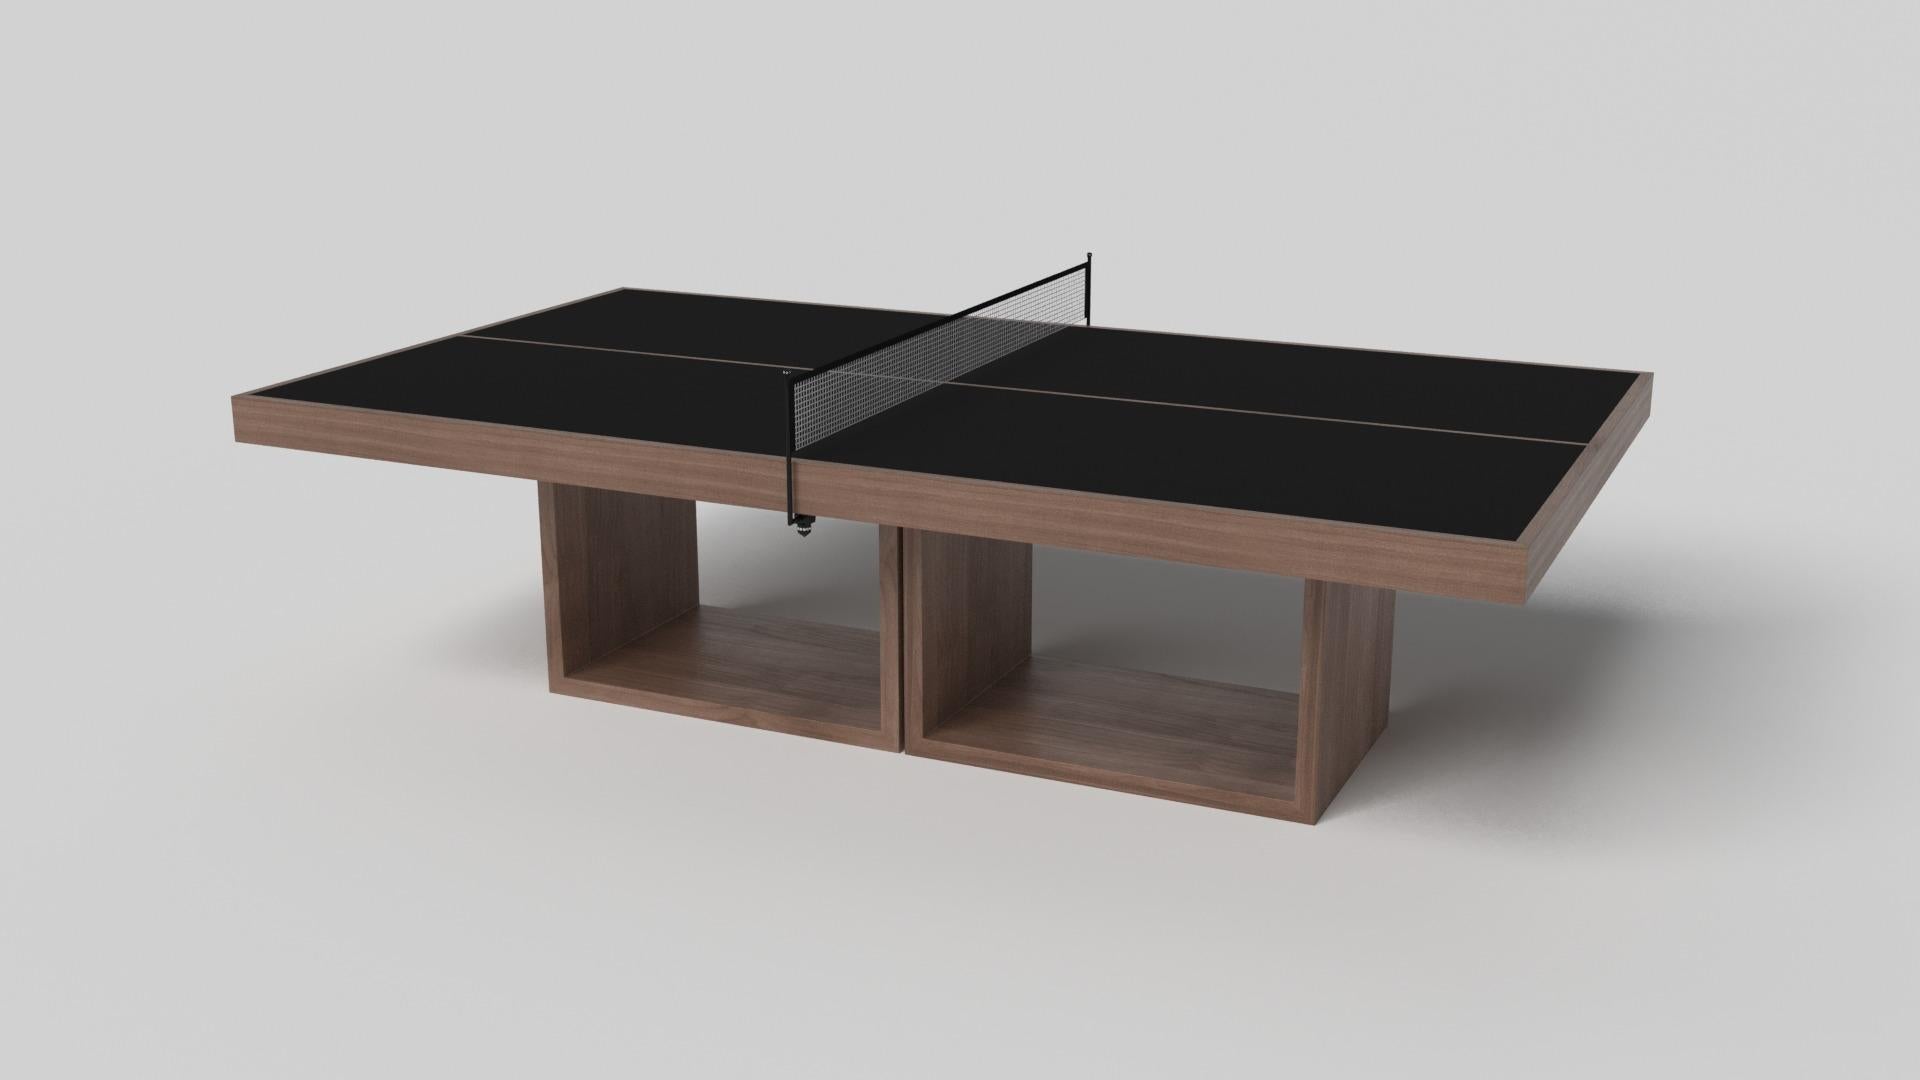 Supported by two rectangular open pedestals as the base, this handcrafted table tennis table is modern and minimalistic with its combination of simple, geometric forms. Viewed from the front, the use of negative space is evident; viewed from the